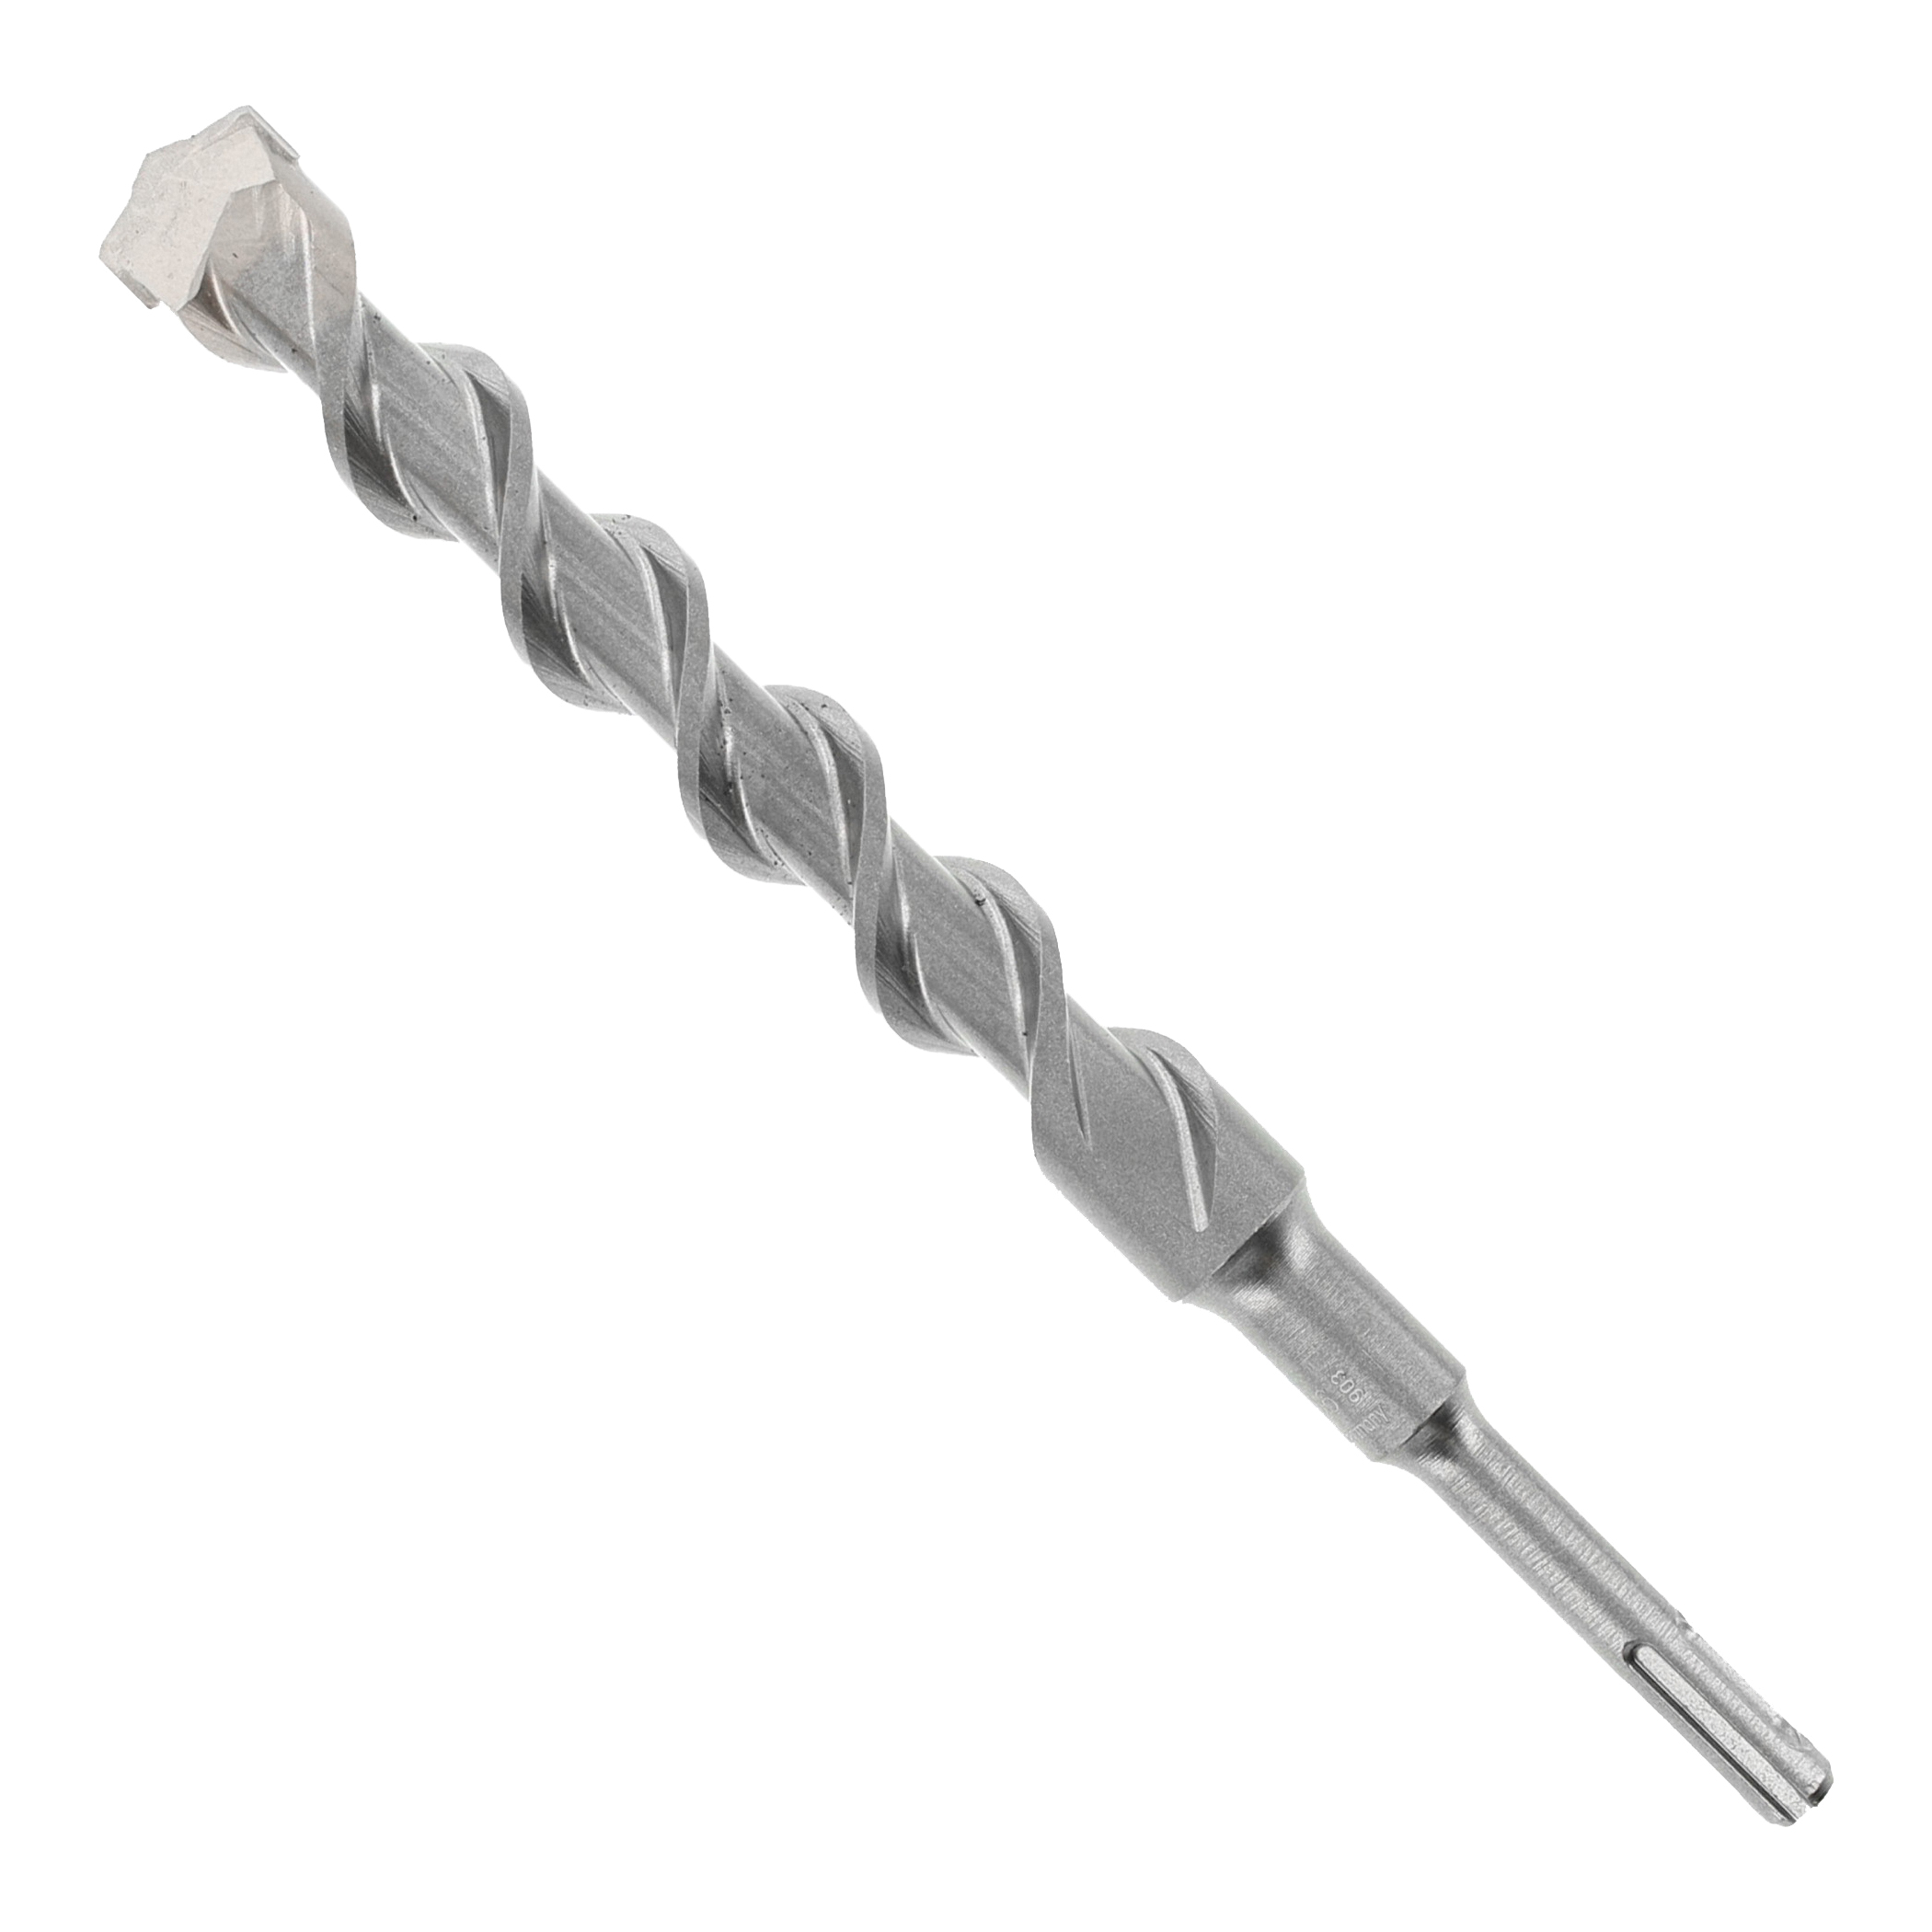 DMAPL2500 Hammer Drill Bit, 7/8 in Dia, 10 in OAL, Percussion, 4-Flute, SDS Plus Shank